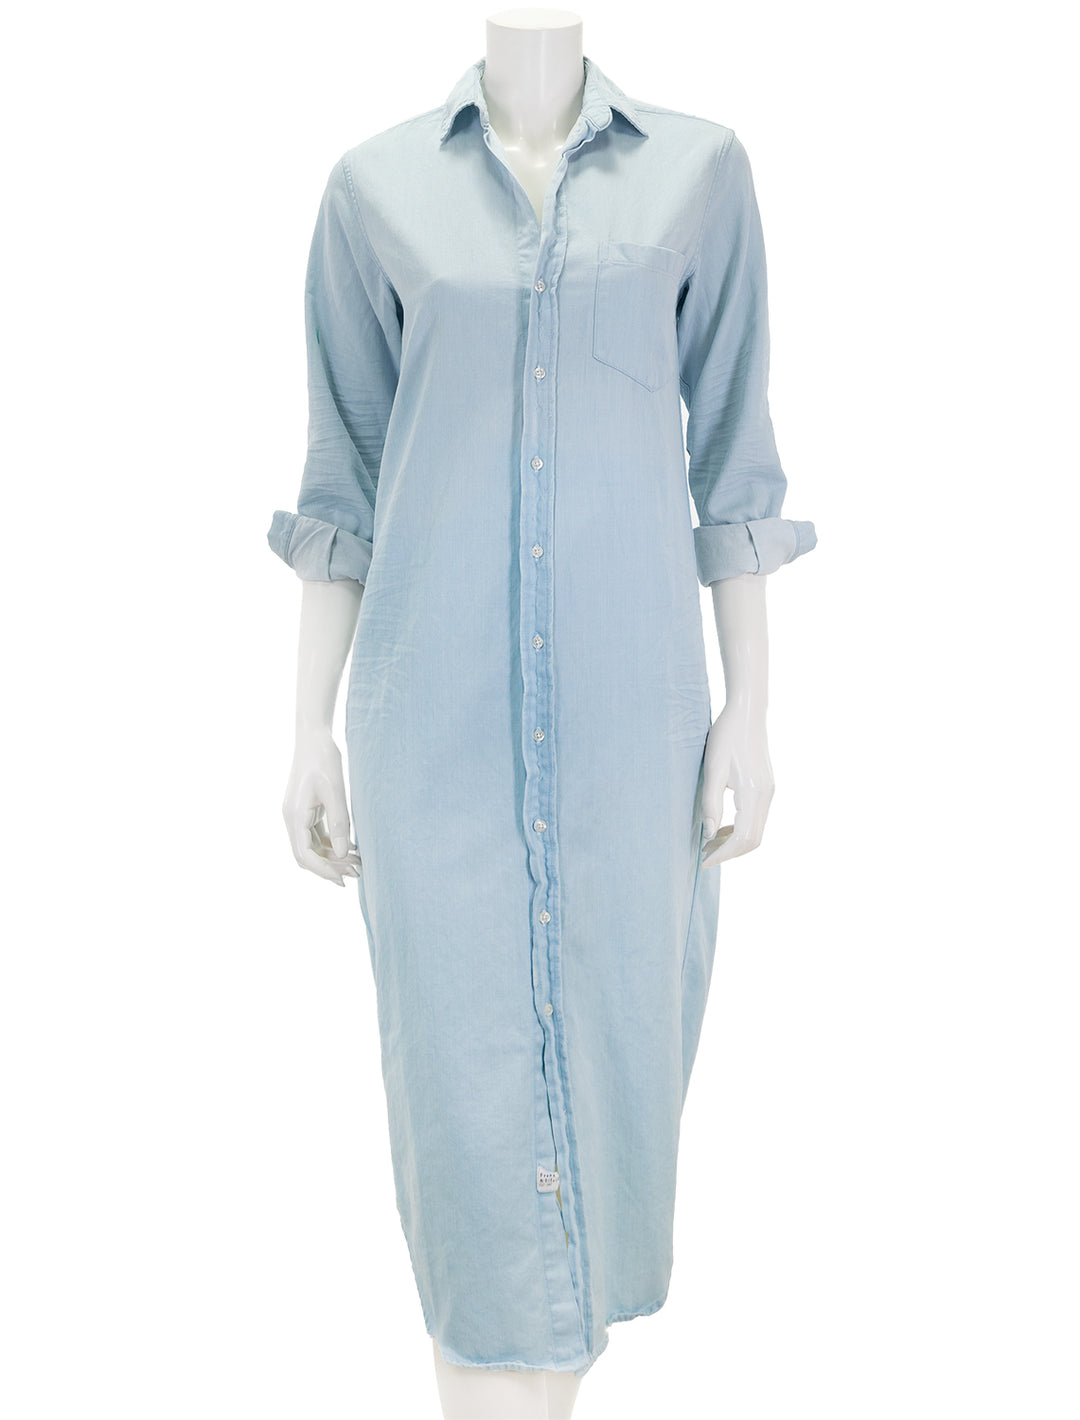 Front view of Frank & Eileen's rory dress in classic blue wash.